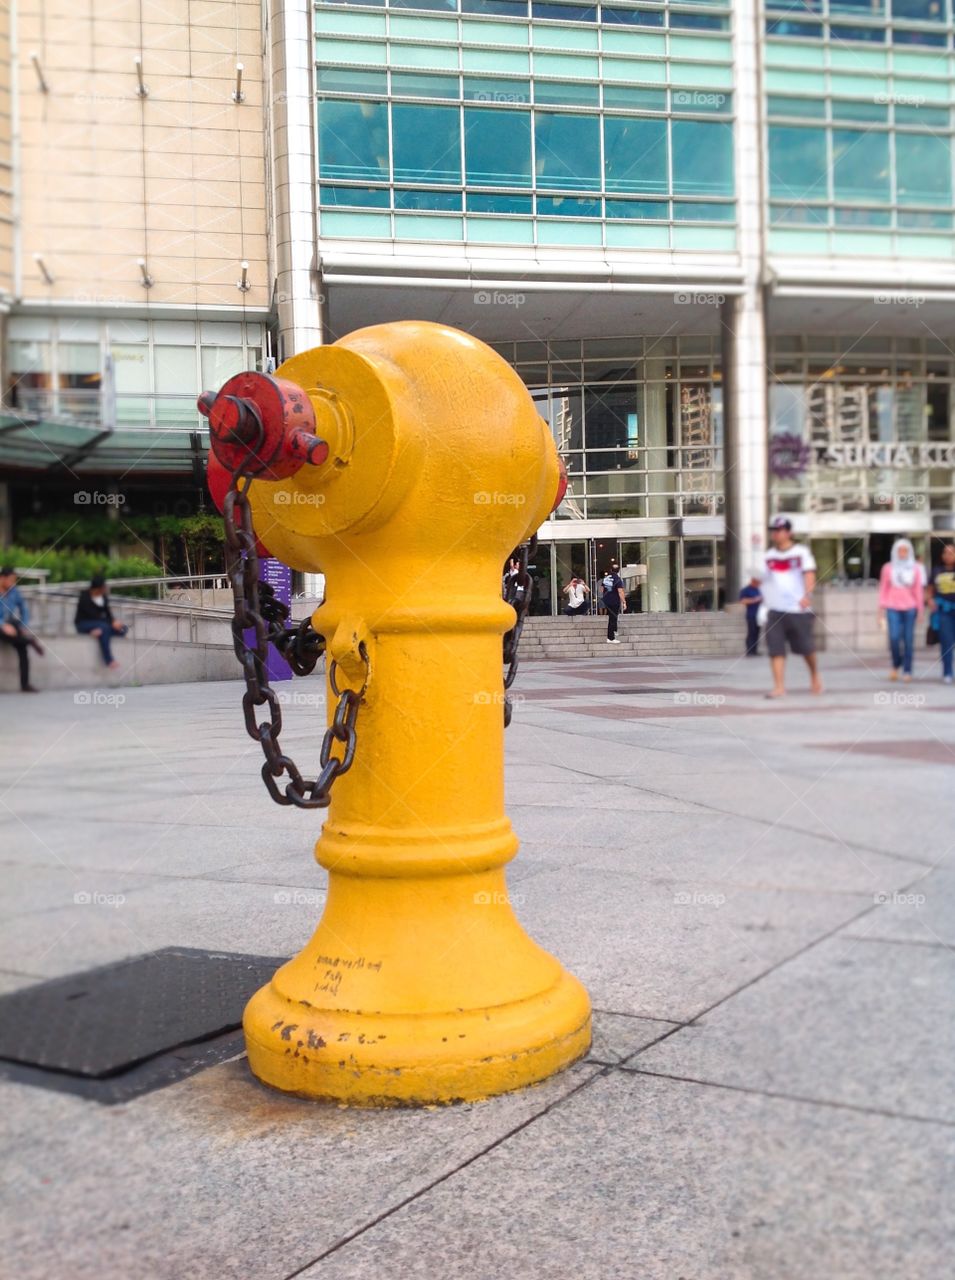  fire hydrant